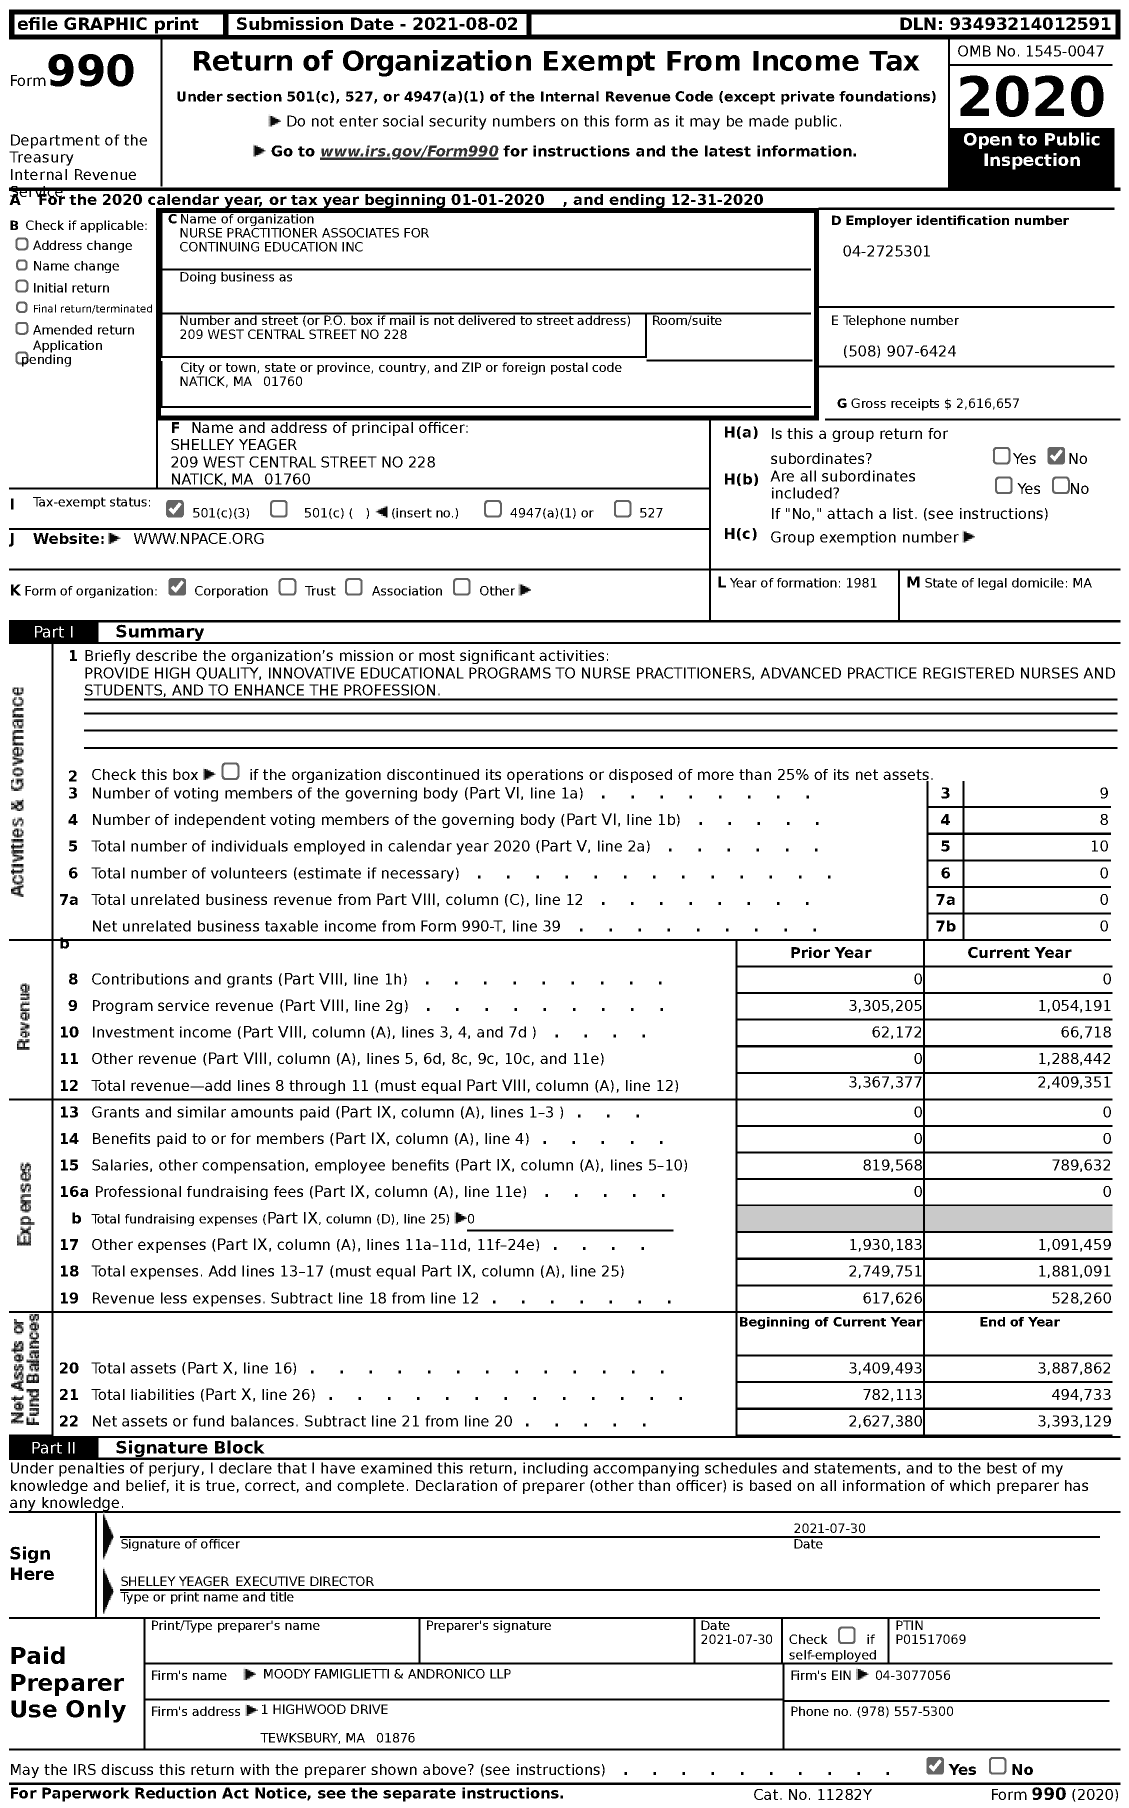 Image of first page of 2020 Form 990 for Nurse Practitioner Associates for Continuing Education (NPACE)